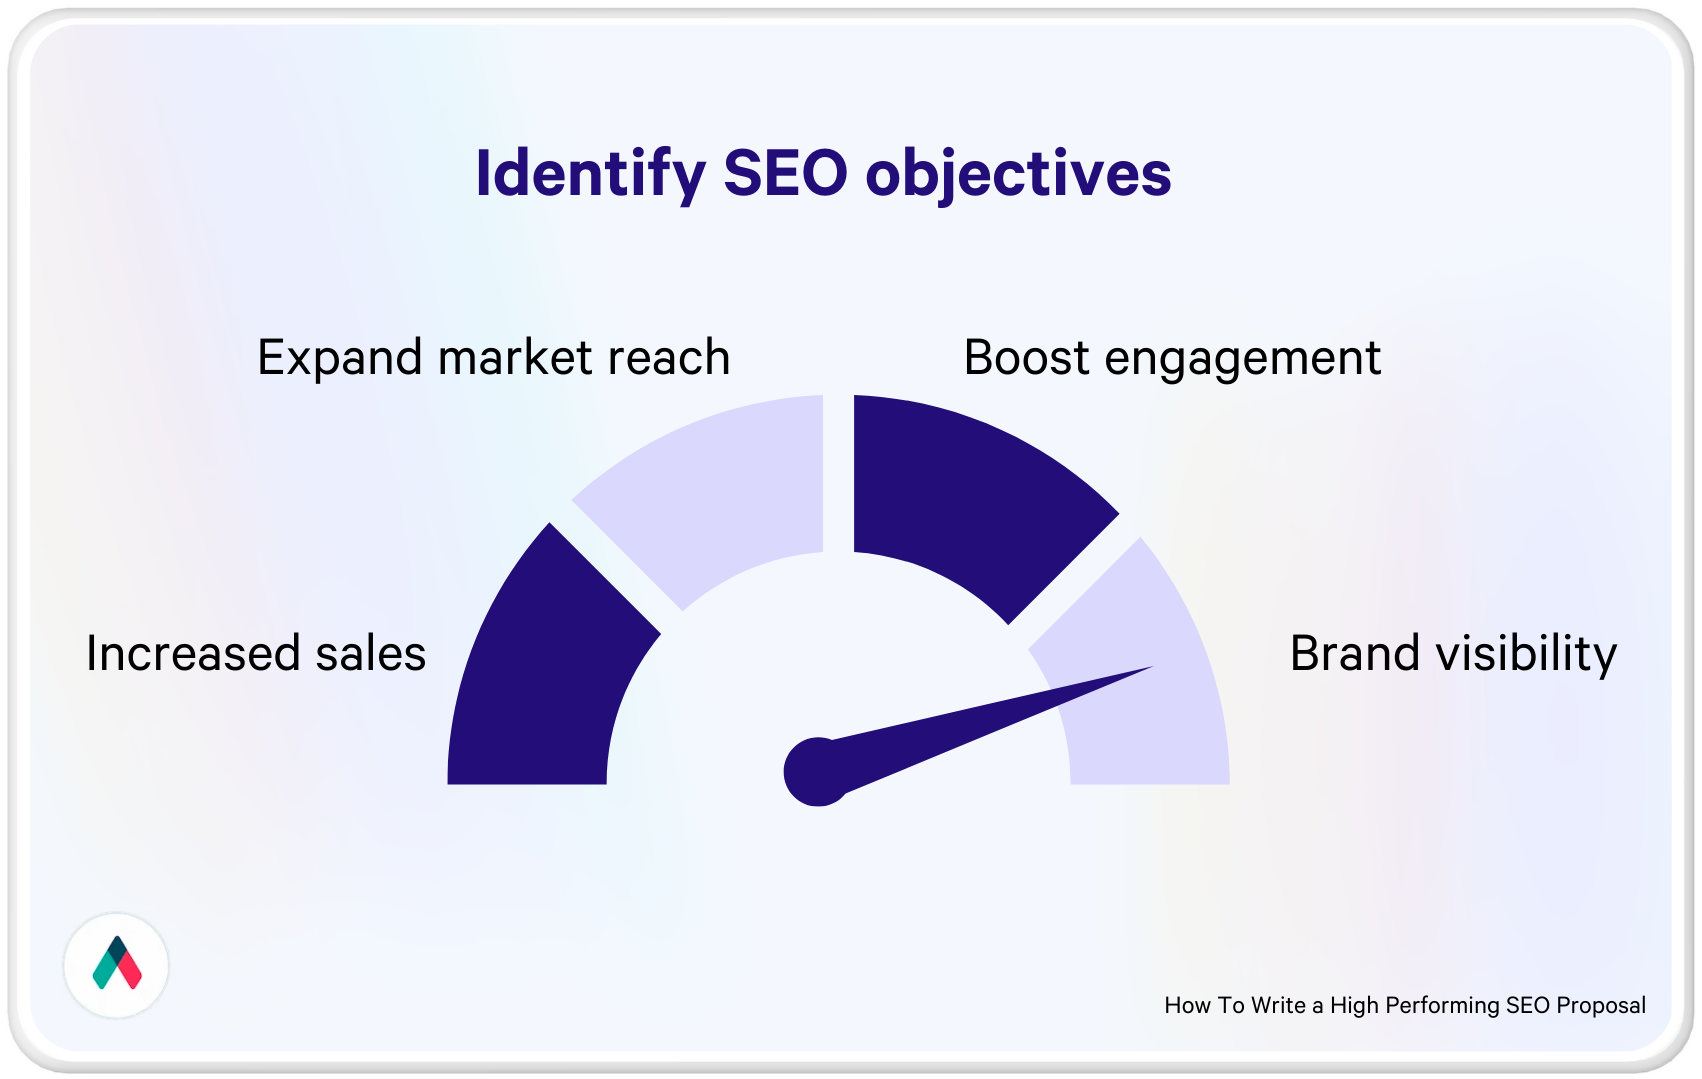 identifying seo objectives based on your customers